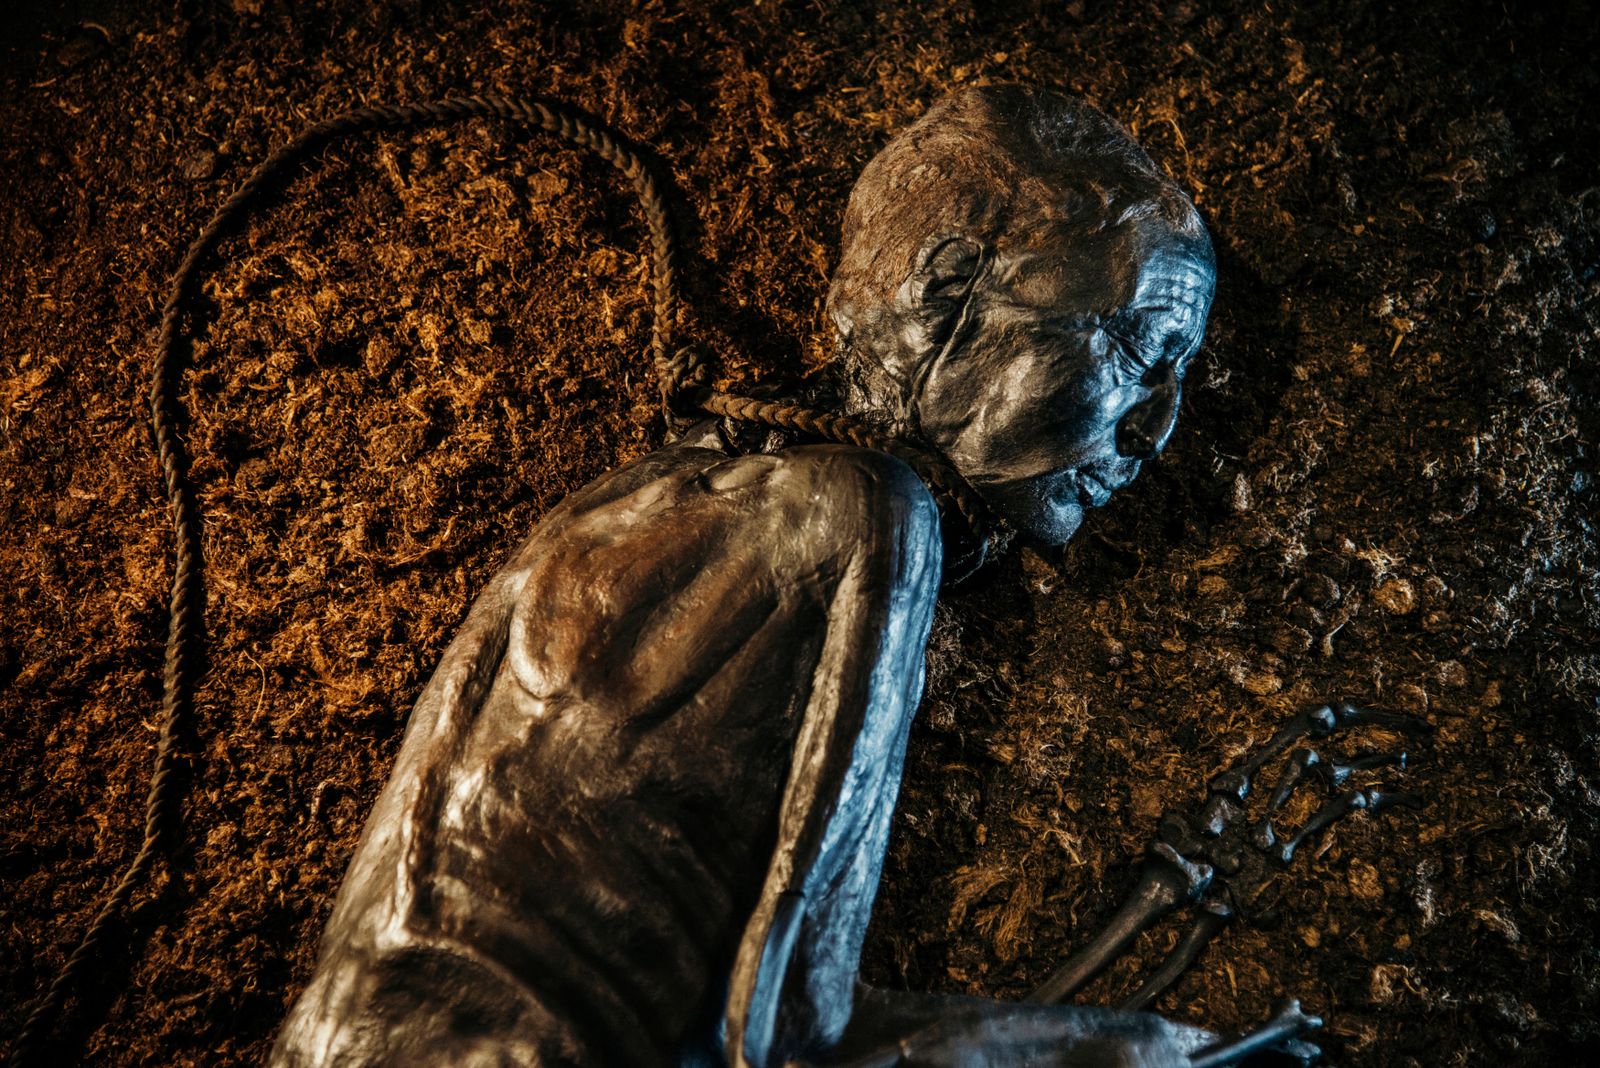 Europe's Famed Bog Bodies Are Starting to Reveal Their Secrets, Science